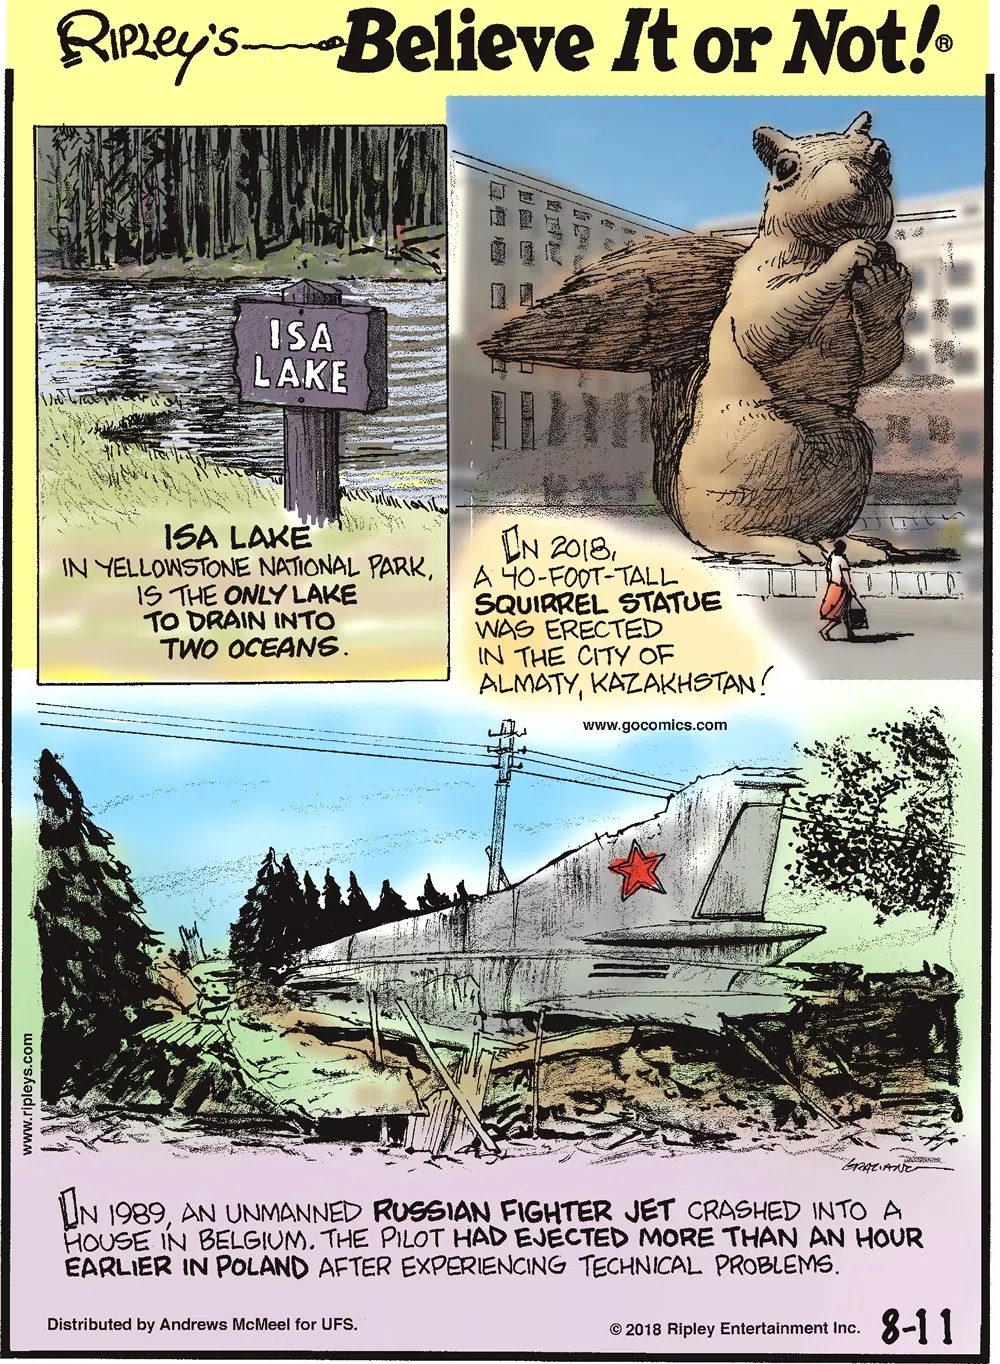 1. Isa Lake in Yellowstone National Park, is the only lake to drain into two oceans. 2. In 2018, a 40-foot-tall squirrel statue was erected in the city of Almaty, Kazakhstan! 3. In 1989, an unmanned Russian fighter jet crashed into a house in Belgium. The pilot had ejected more than an hour earlier in Poland after experiencing technical problems.